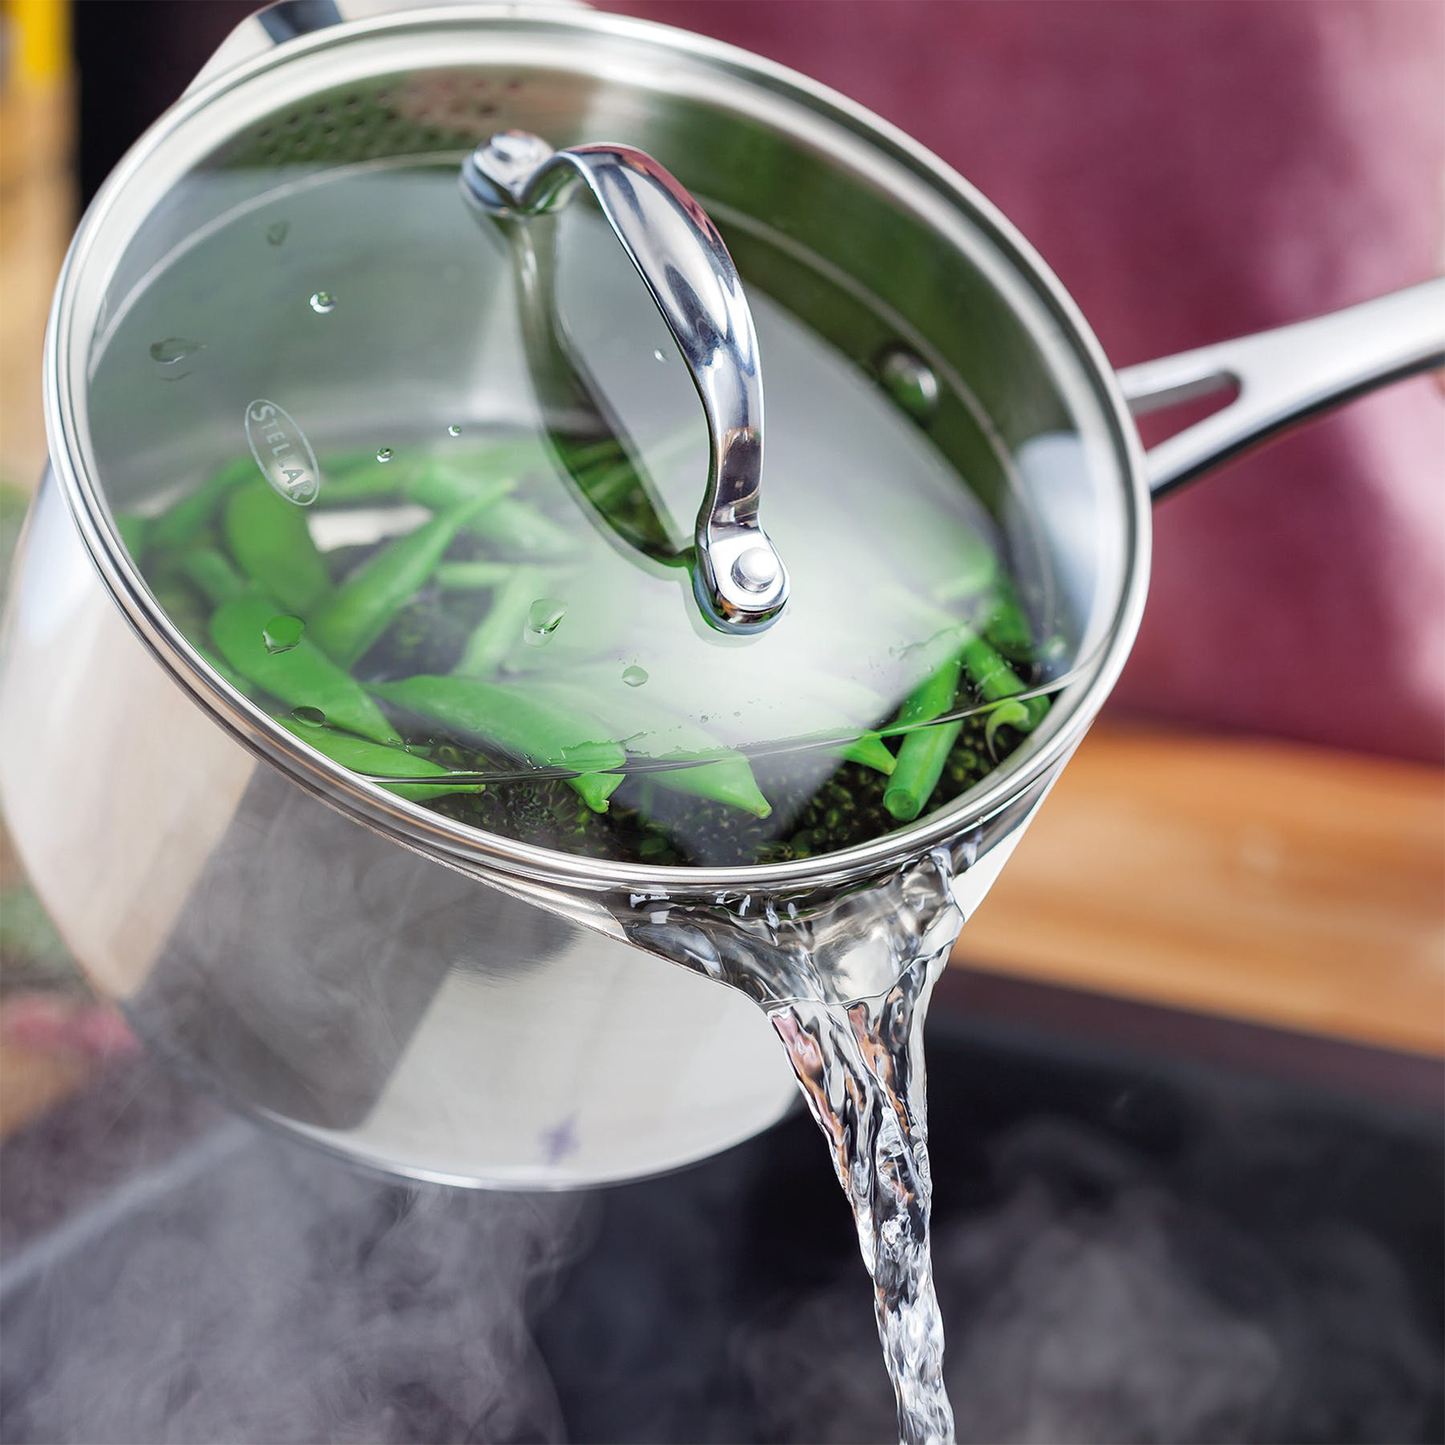 hot water being poured from the pot which is full of green vegetables 